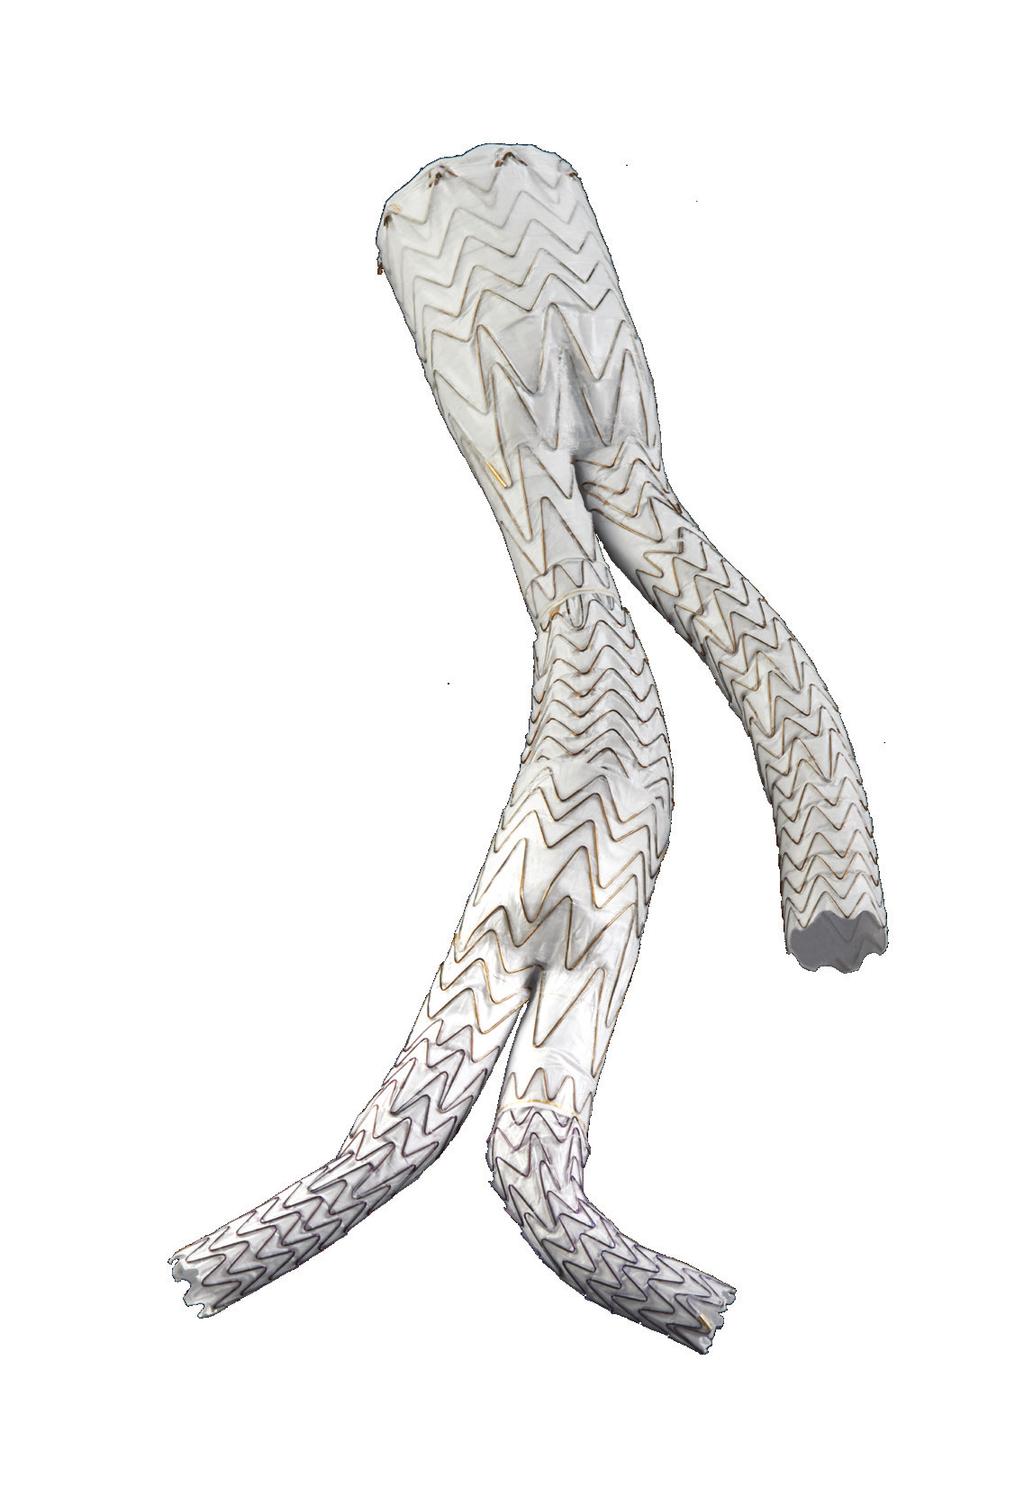 GORE EXCLUDER Iliac Branch Endoprosthesis U.S. IDE Clinical Trial now has 2-year follow-up data for all patients from primary enrollment (n = 63).